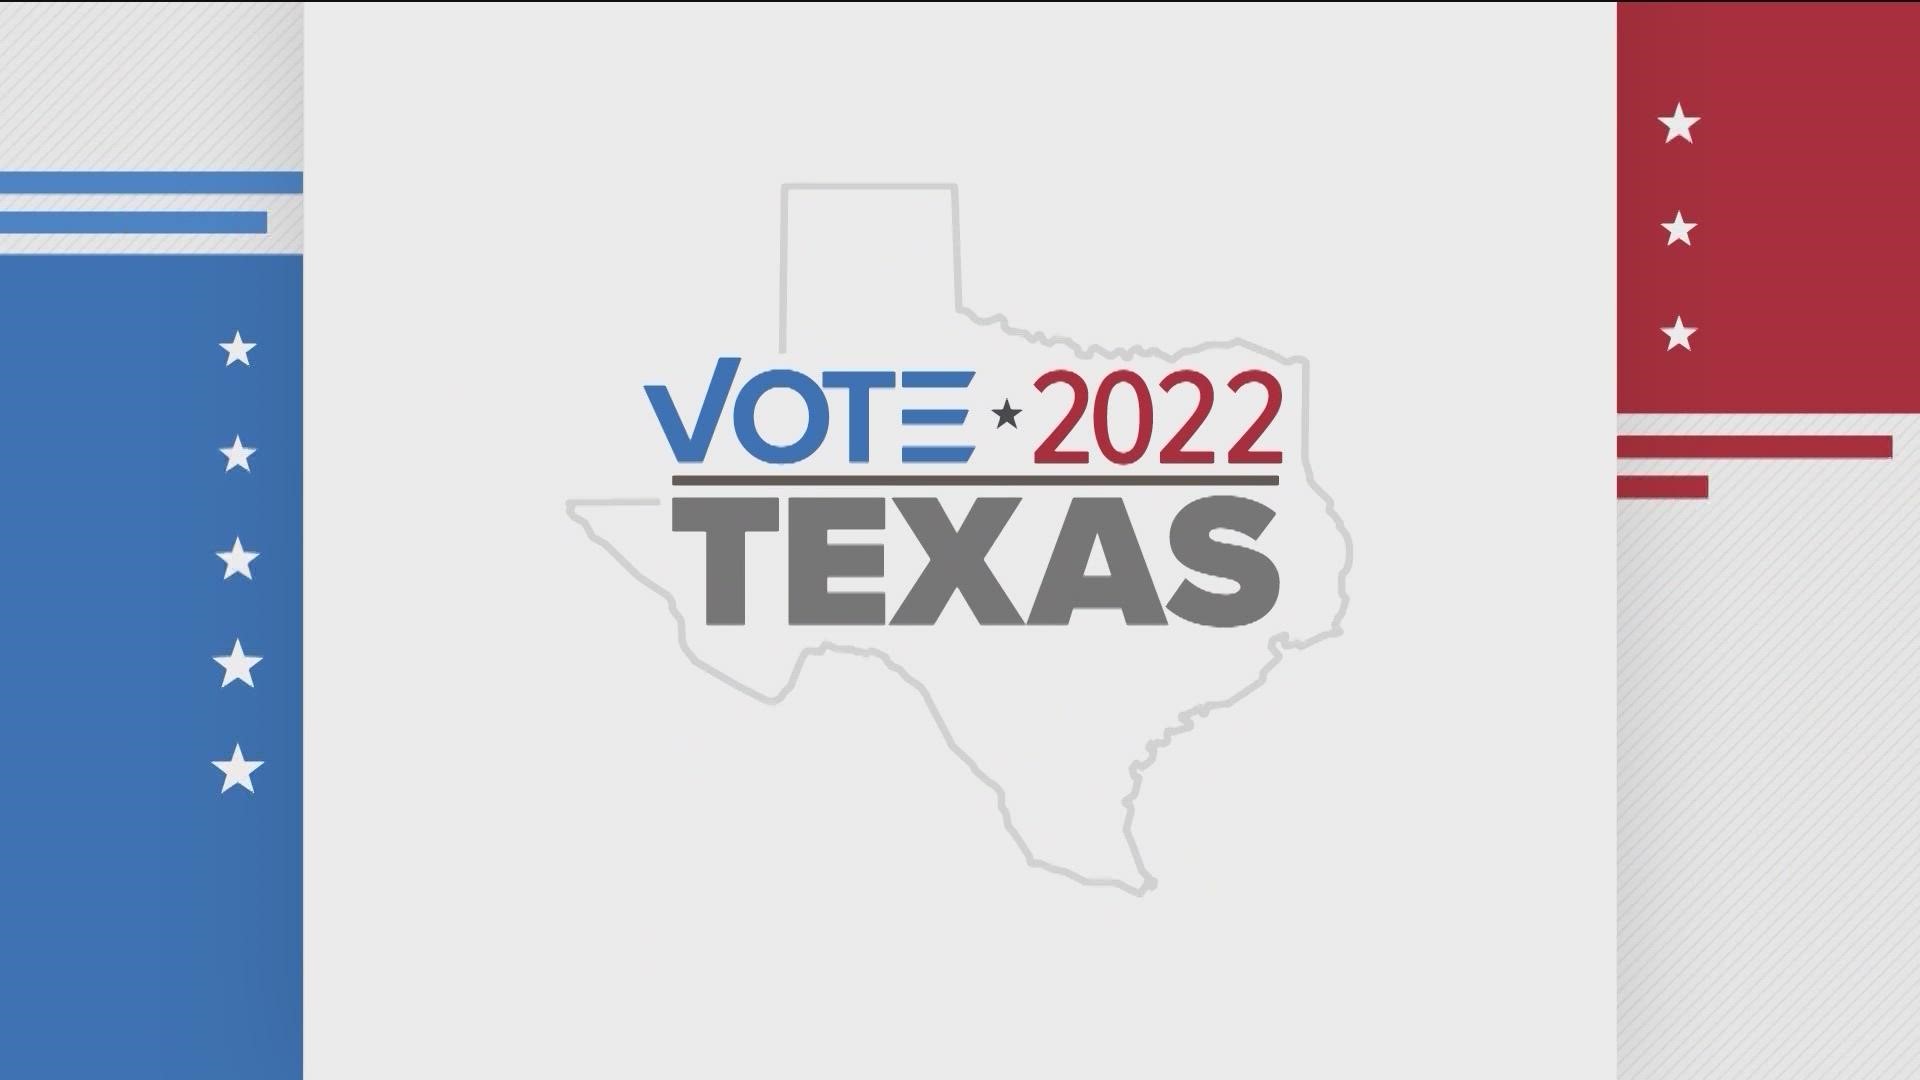 This is the second part of the three-part poll analyzing what Texas voters think about the issues and politicians ahead of the November 2022 election.